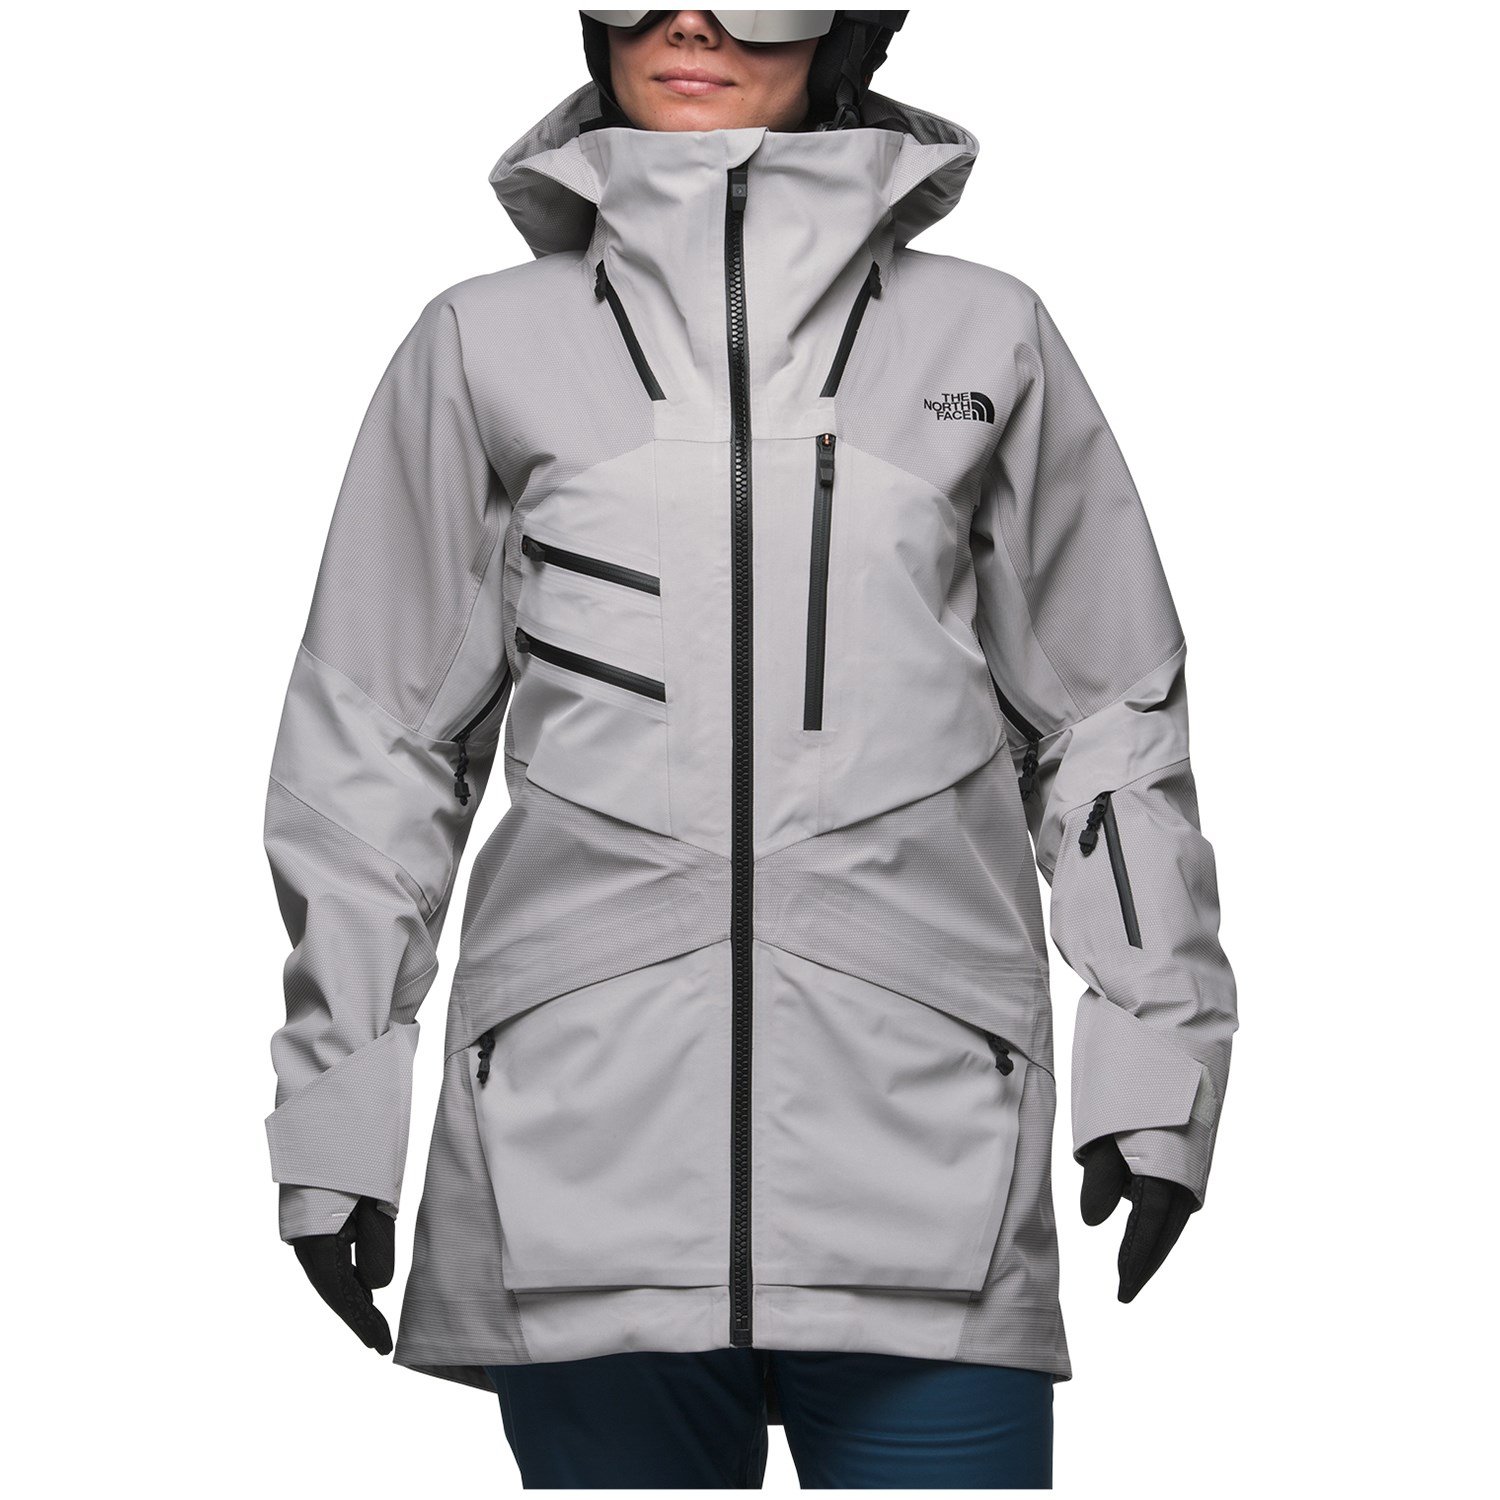 north face steep series women's jacket